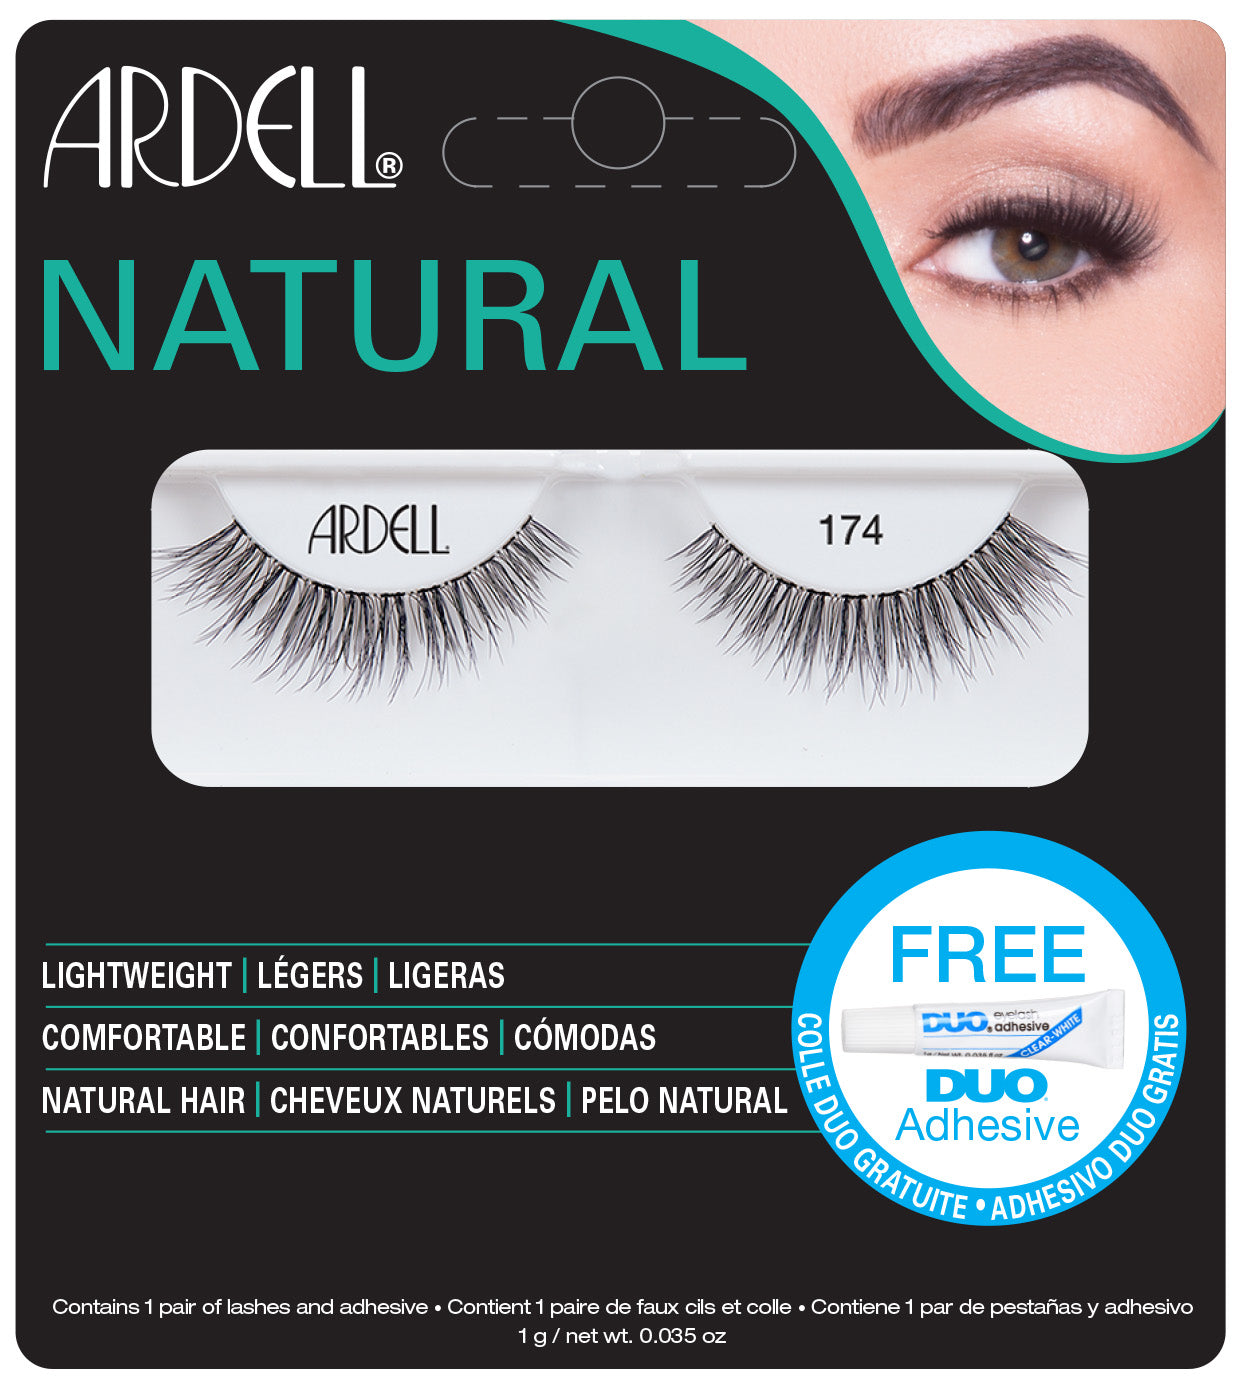 Ardell Natural 174 Lashes with Free DUO Glue